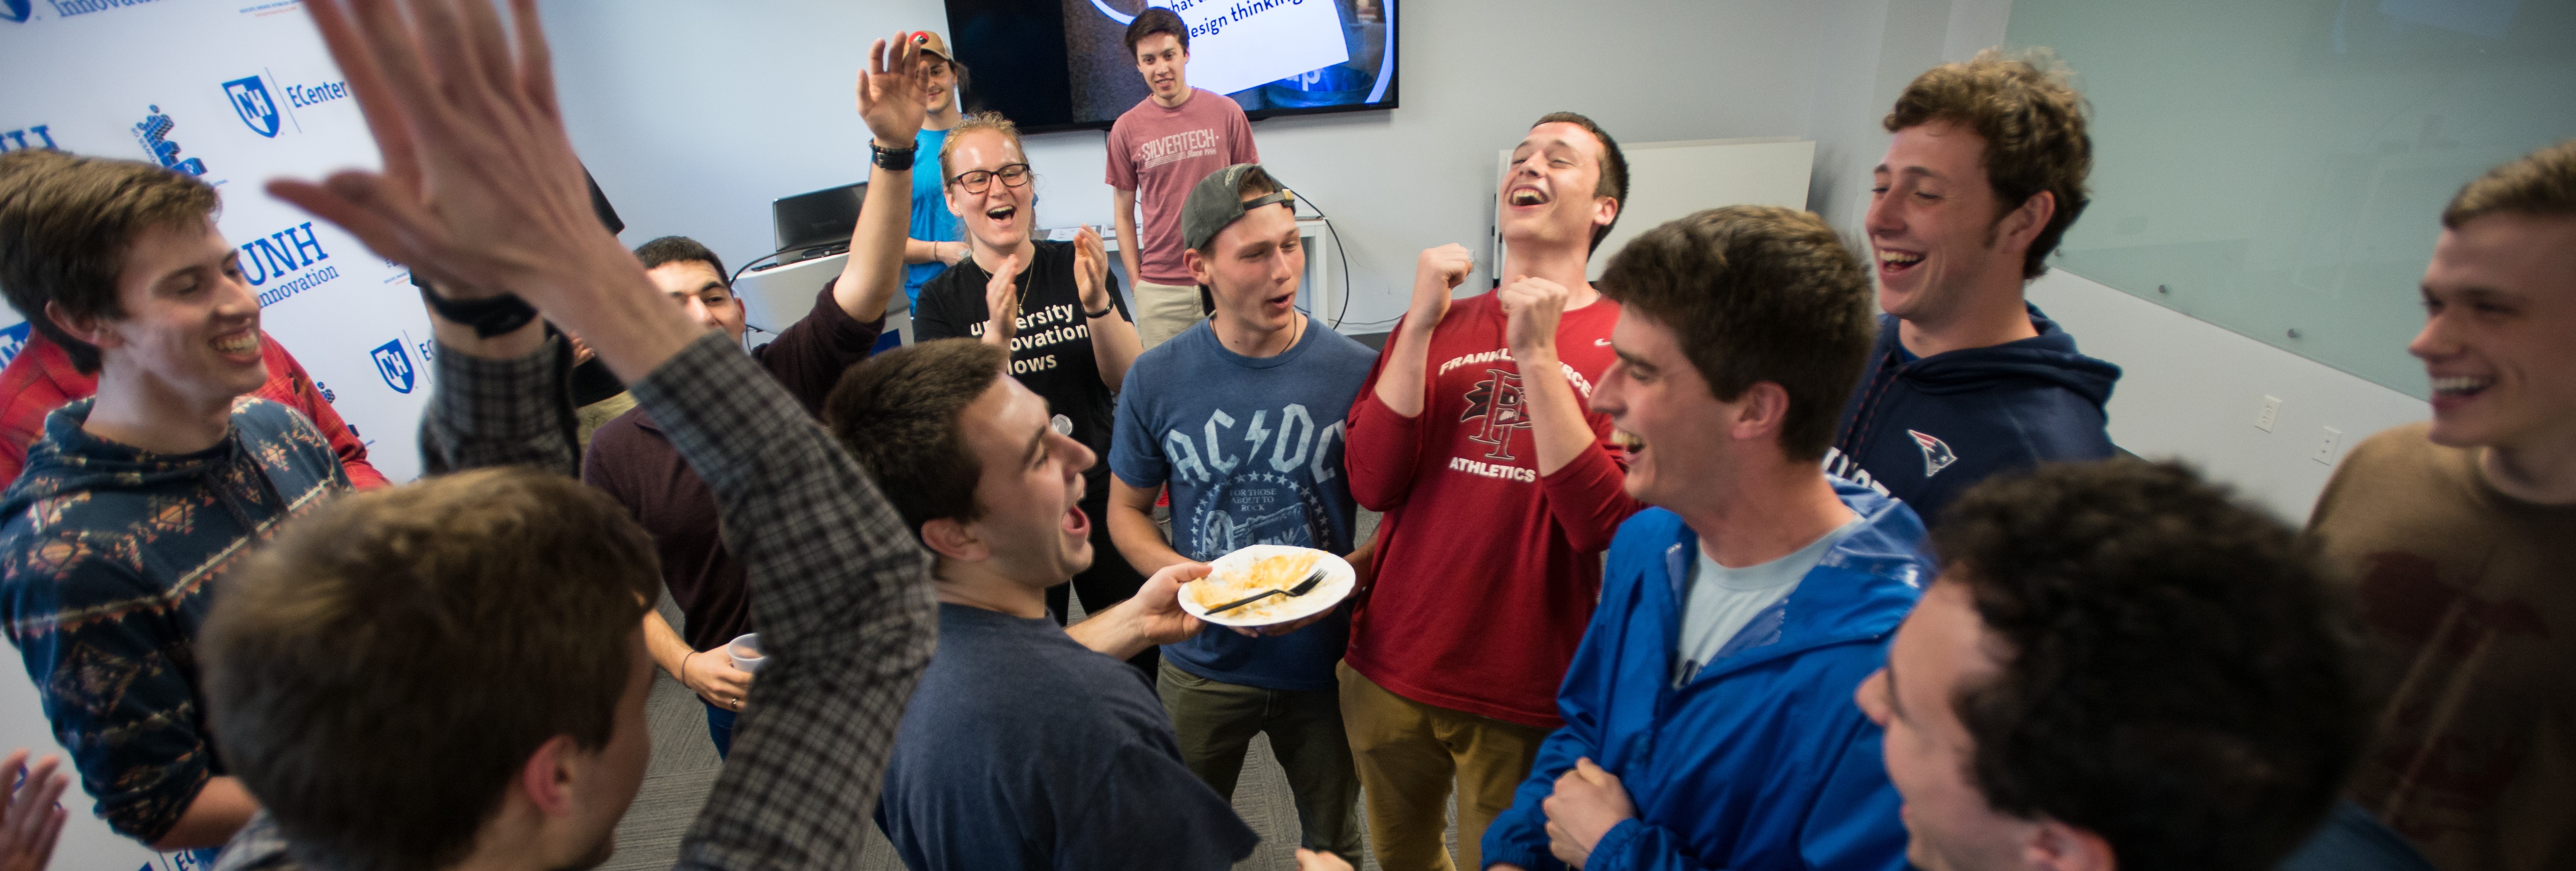 UNH EClub students celebrate with pizza